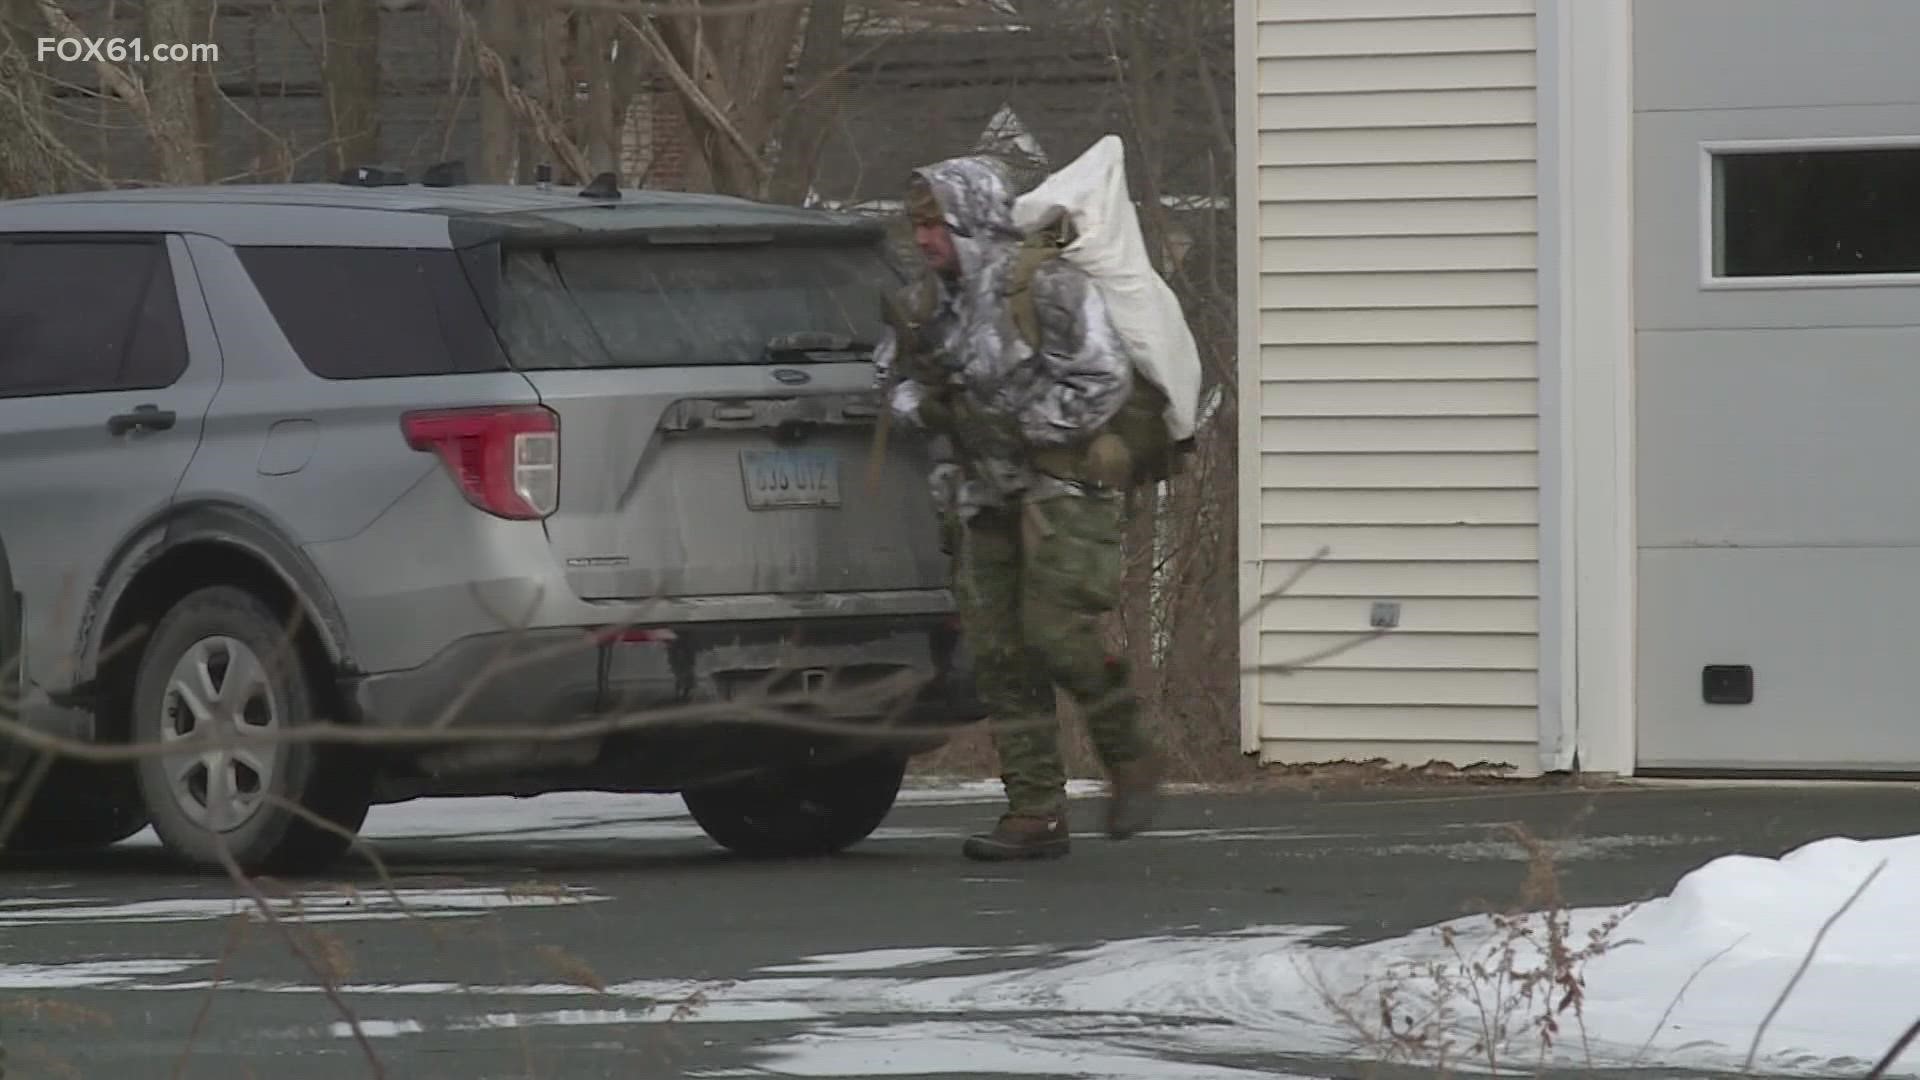 An hours-long standoff between a barricaded man and police in Coventry ended peacefully following hours of negotiation with the suspect.